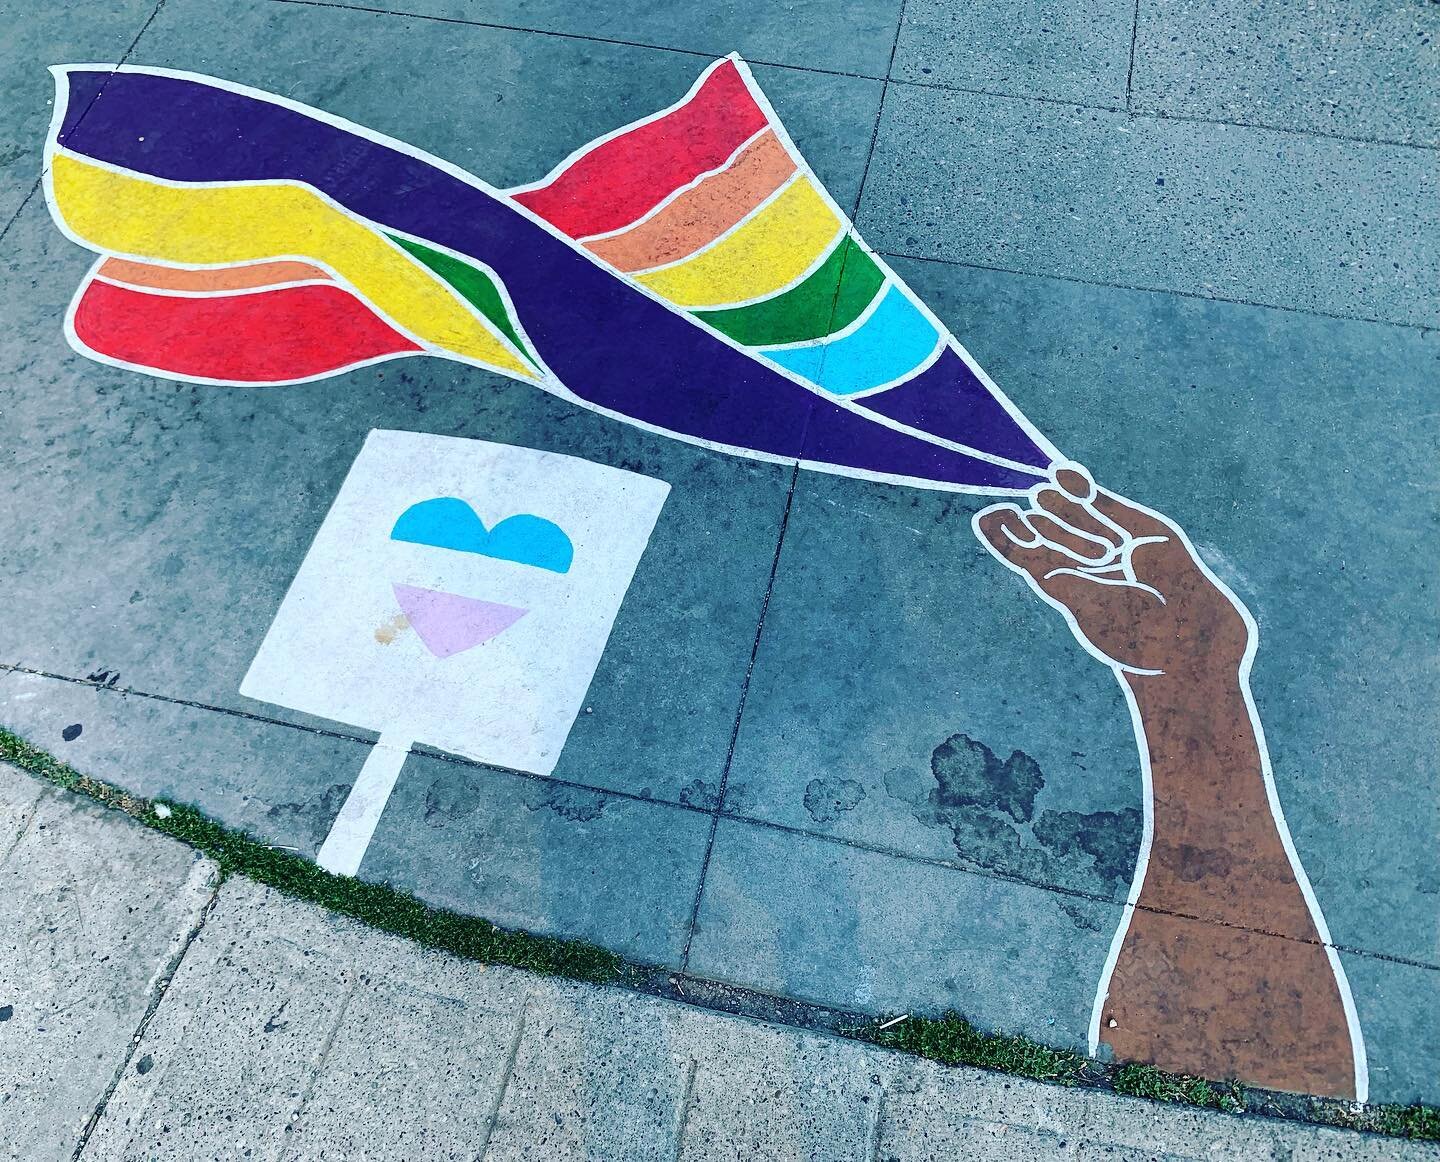 #SelfCareSunday included taking a stroll around Central Memorial Park to check out the four murals created by LGBTQIA2S+ artists. 

I am a passionate social justice ally, so it makes me happy to see public art that strives to embrace our diverse comm